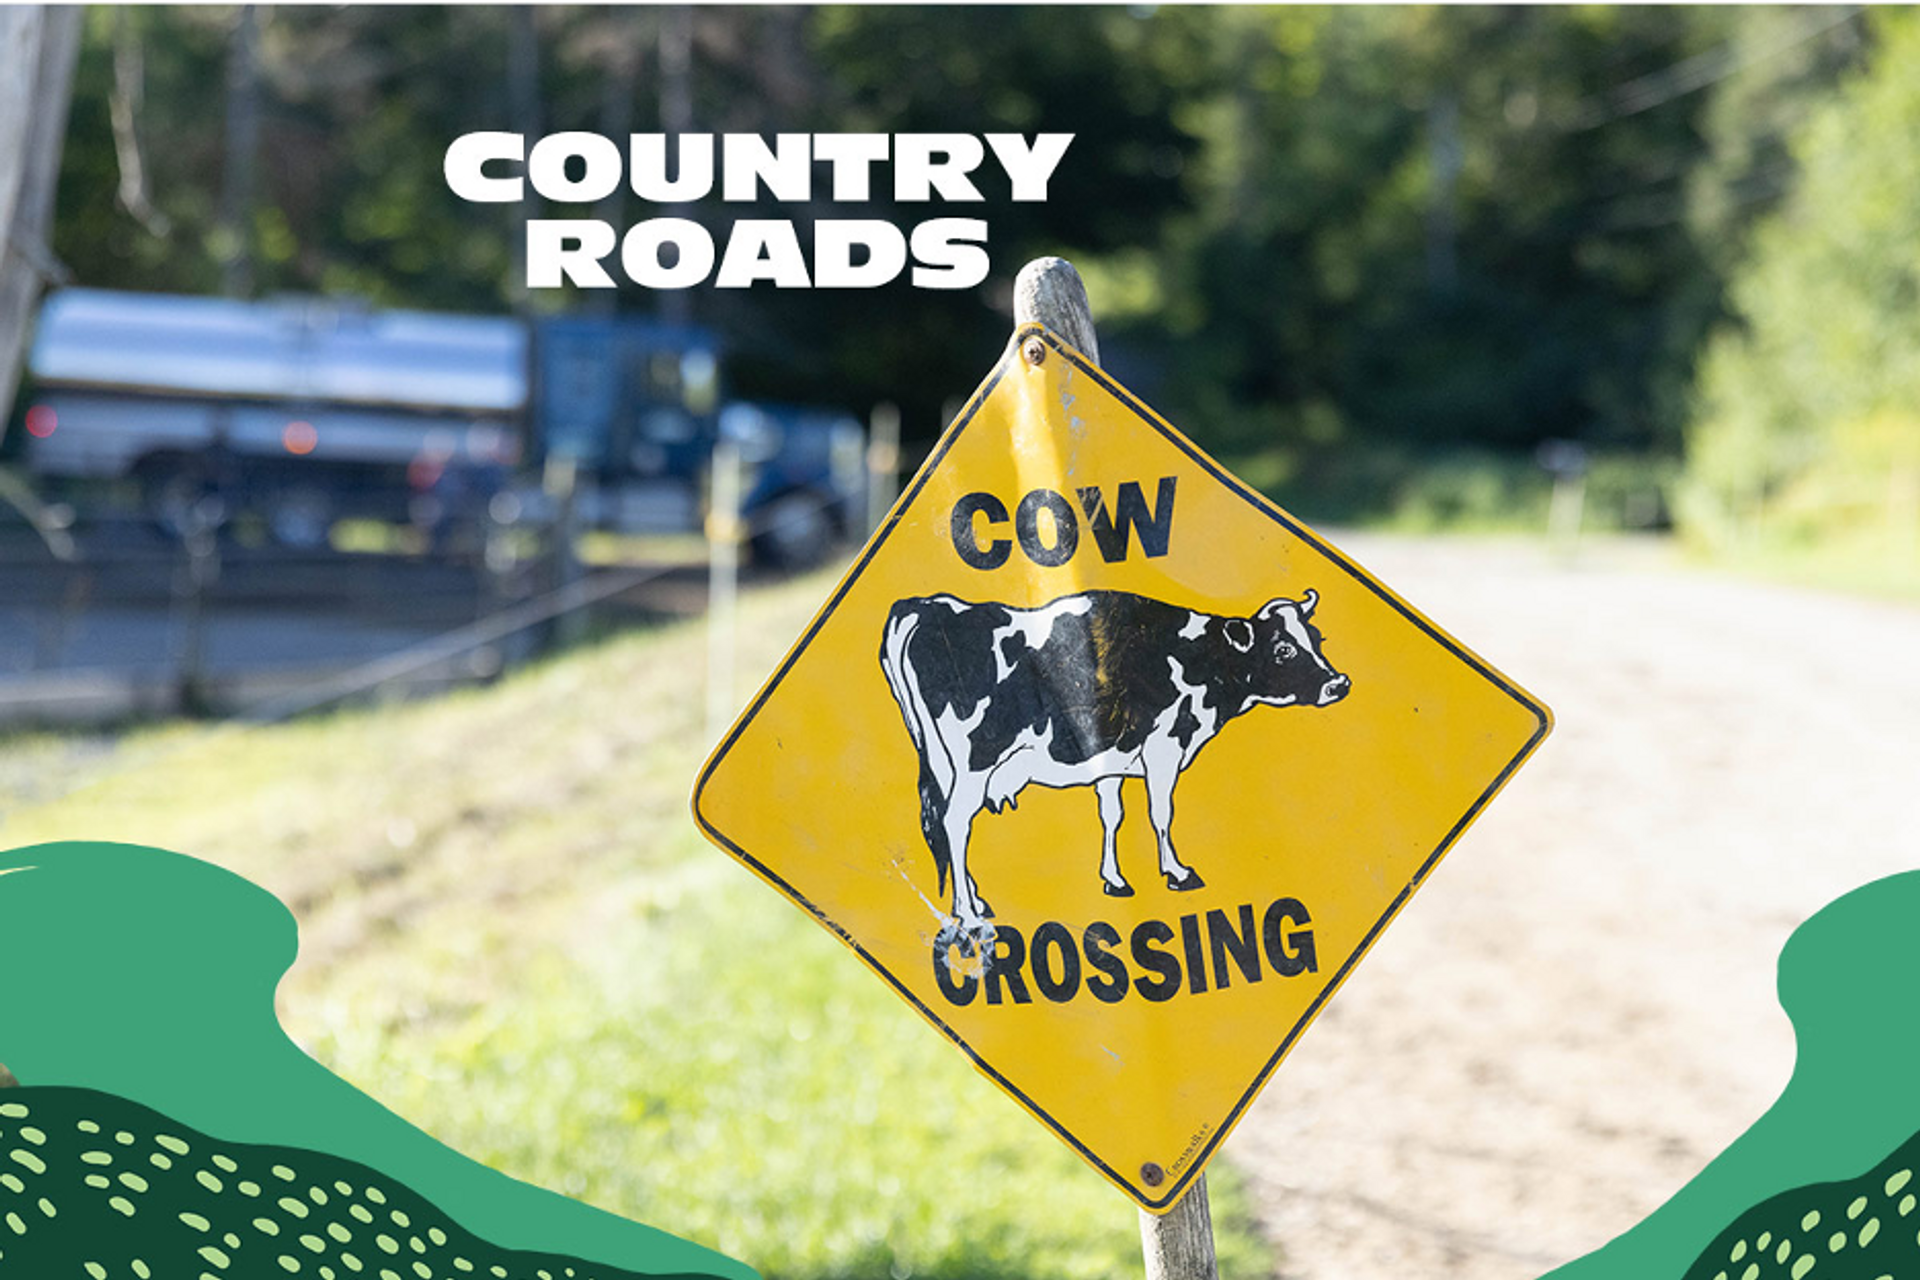 A cow crossing sign is shown at the Osgood farm in Vermont.